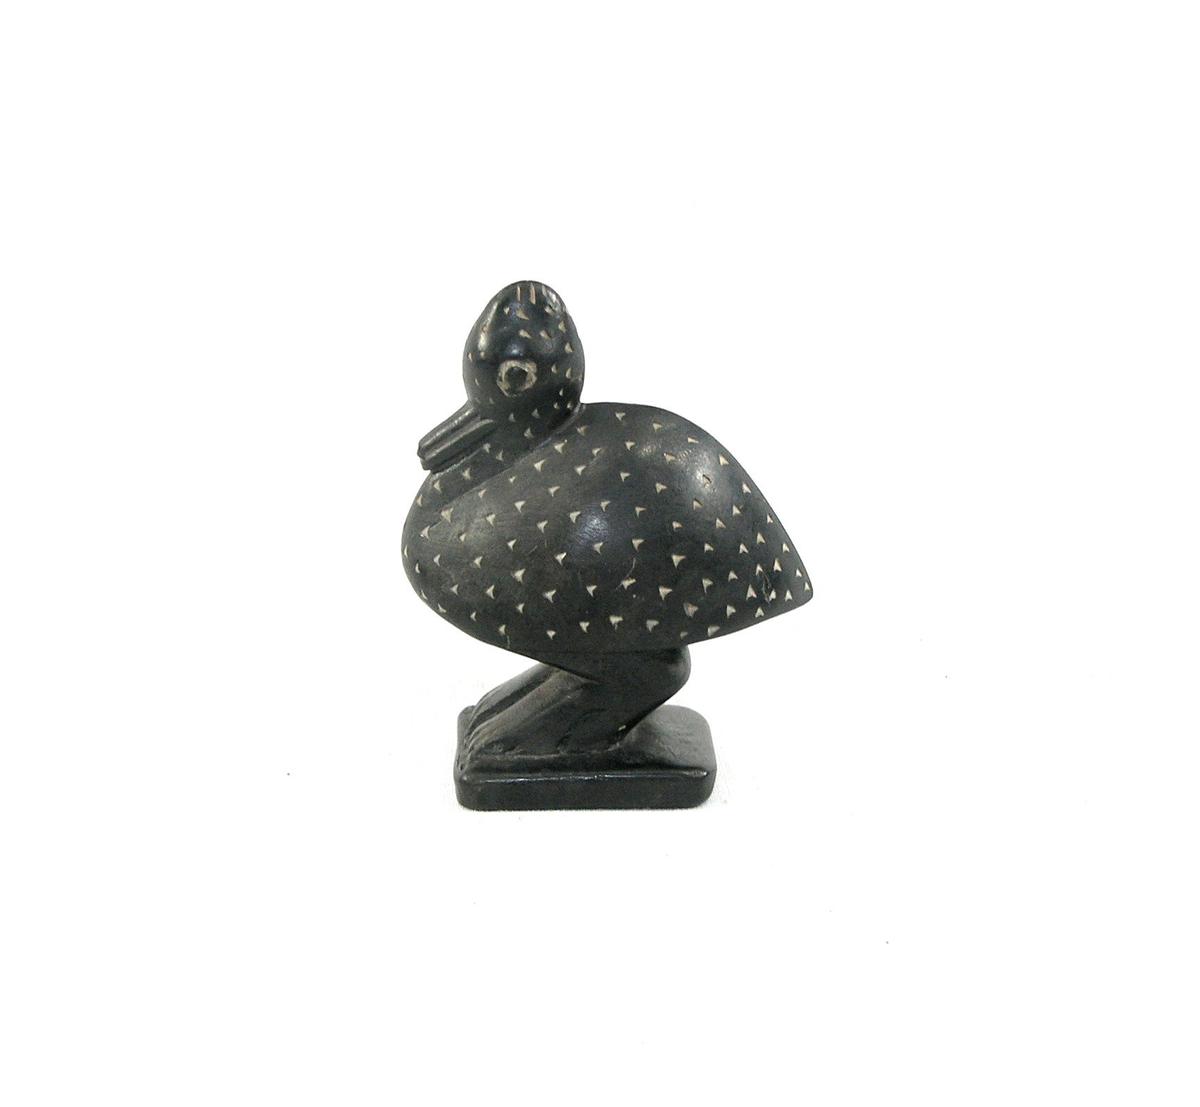 Vintage American Indian Stone Carved Bird. Marked  "Isaya" on The Bottom.